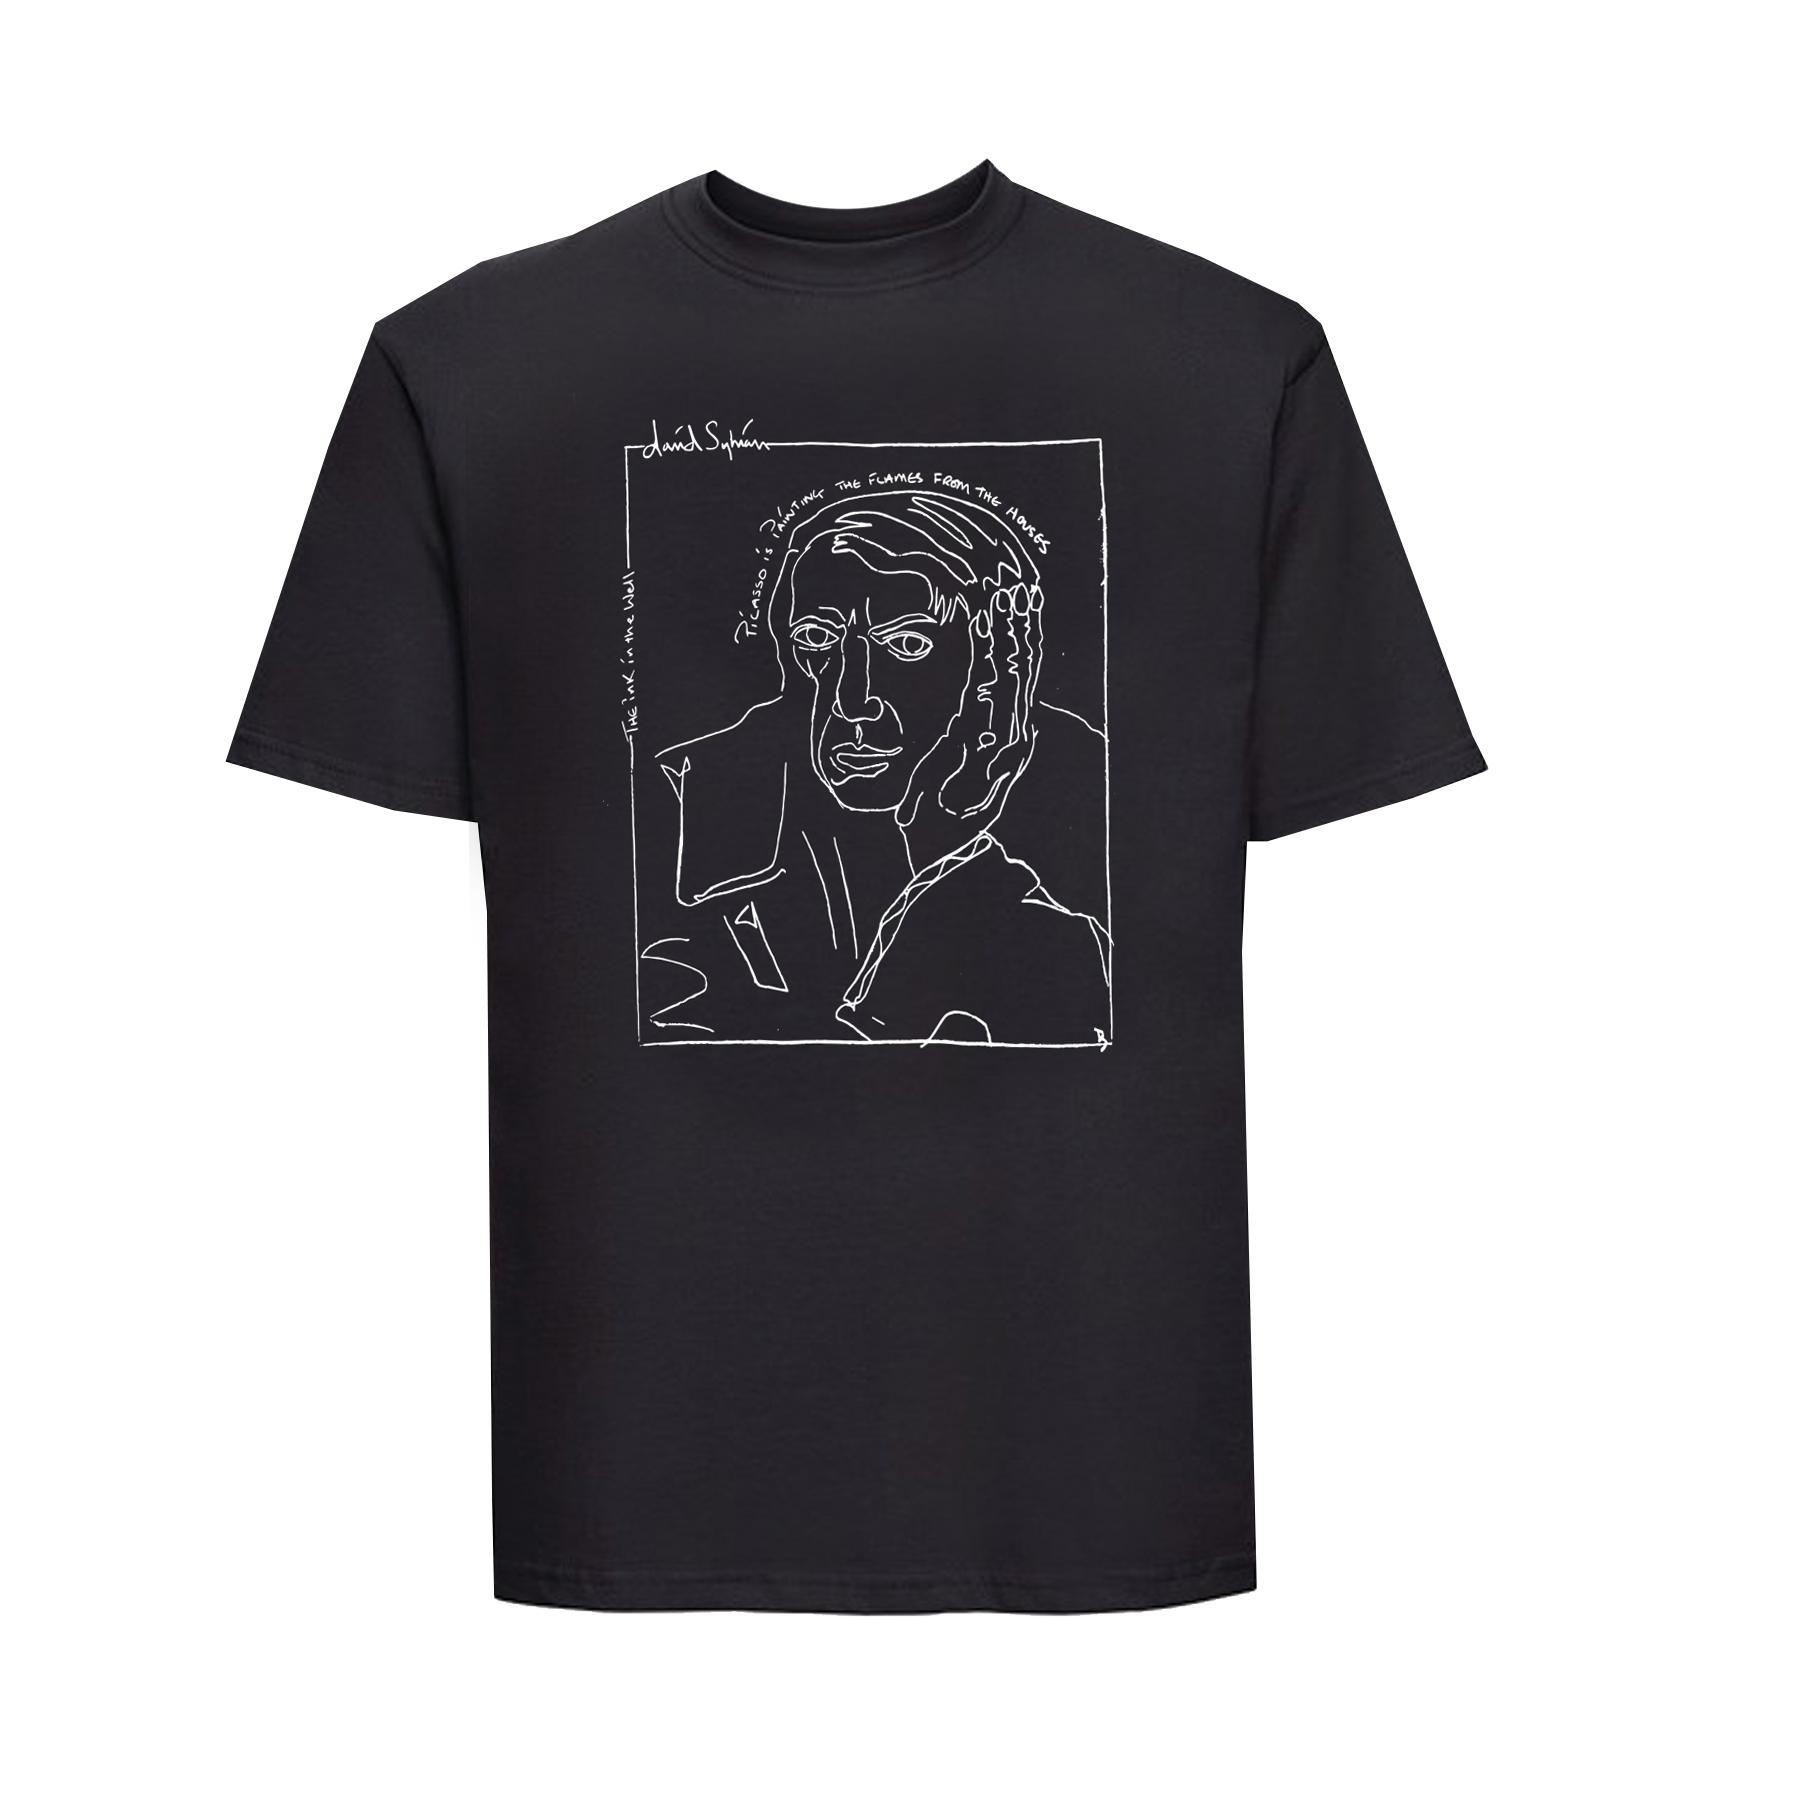 David Sylvian - The Ink In The Well (Picasso) Vintage T-shirt